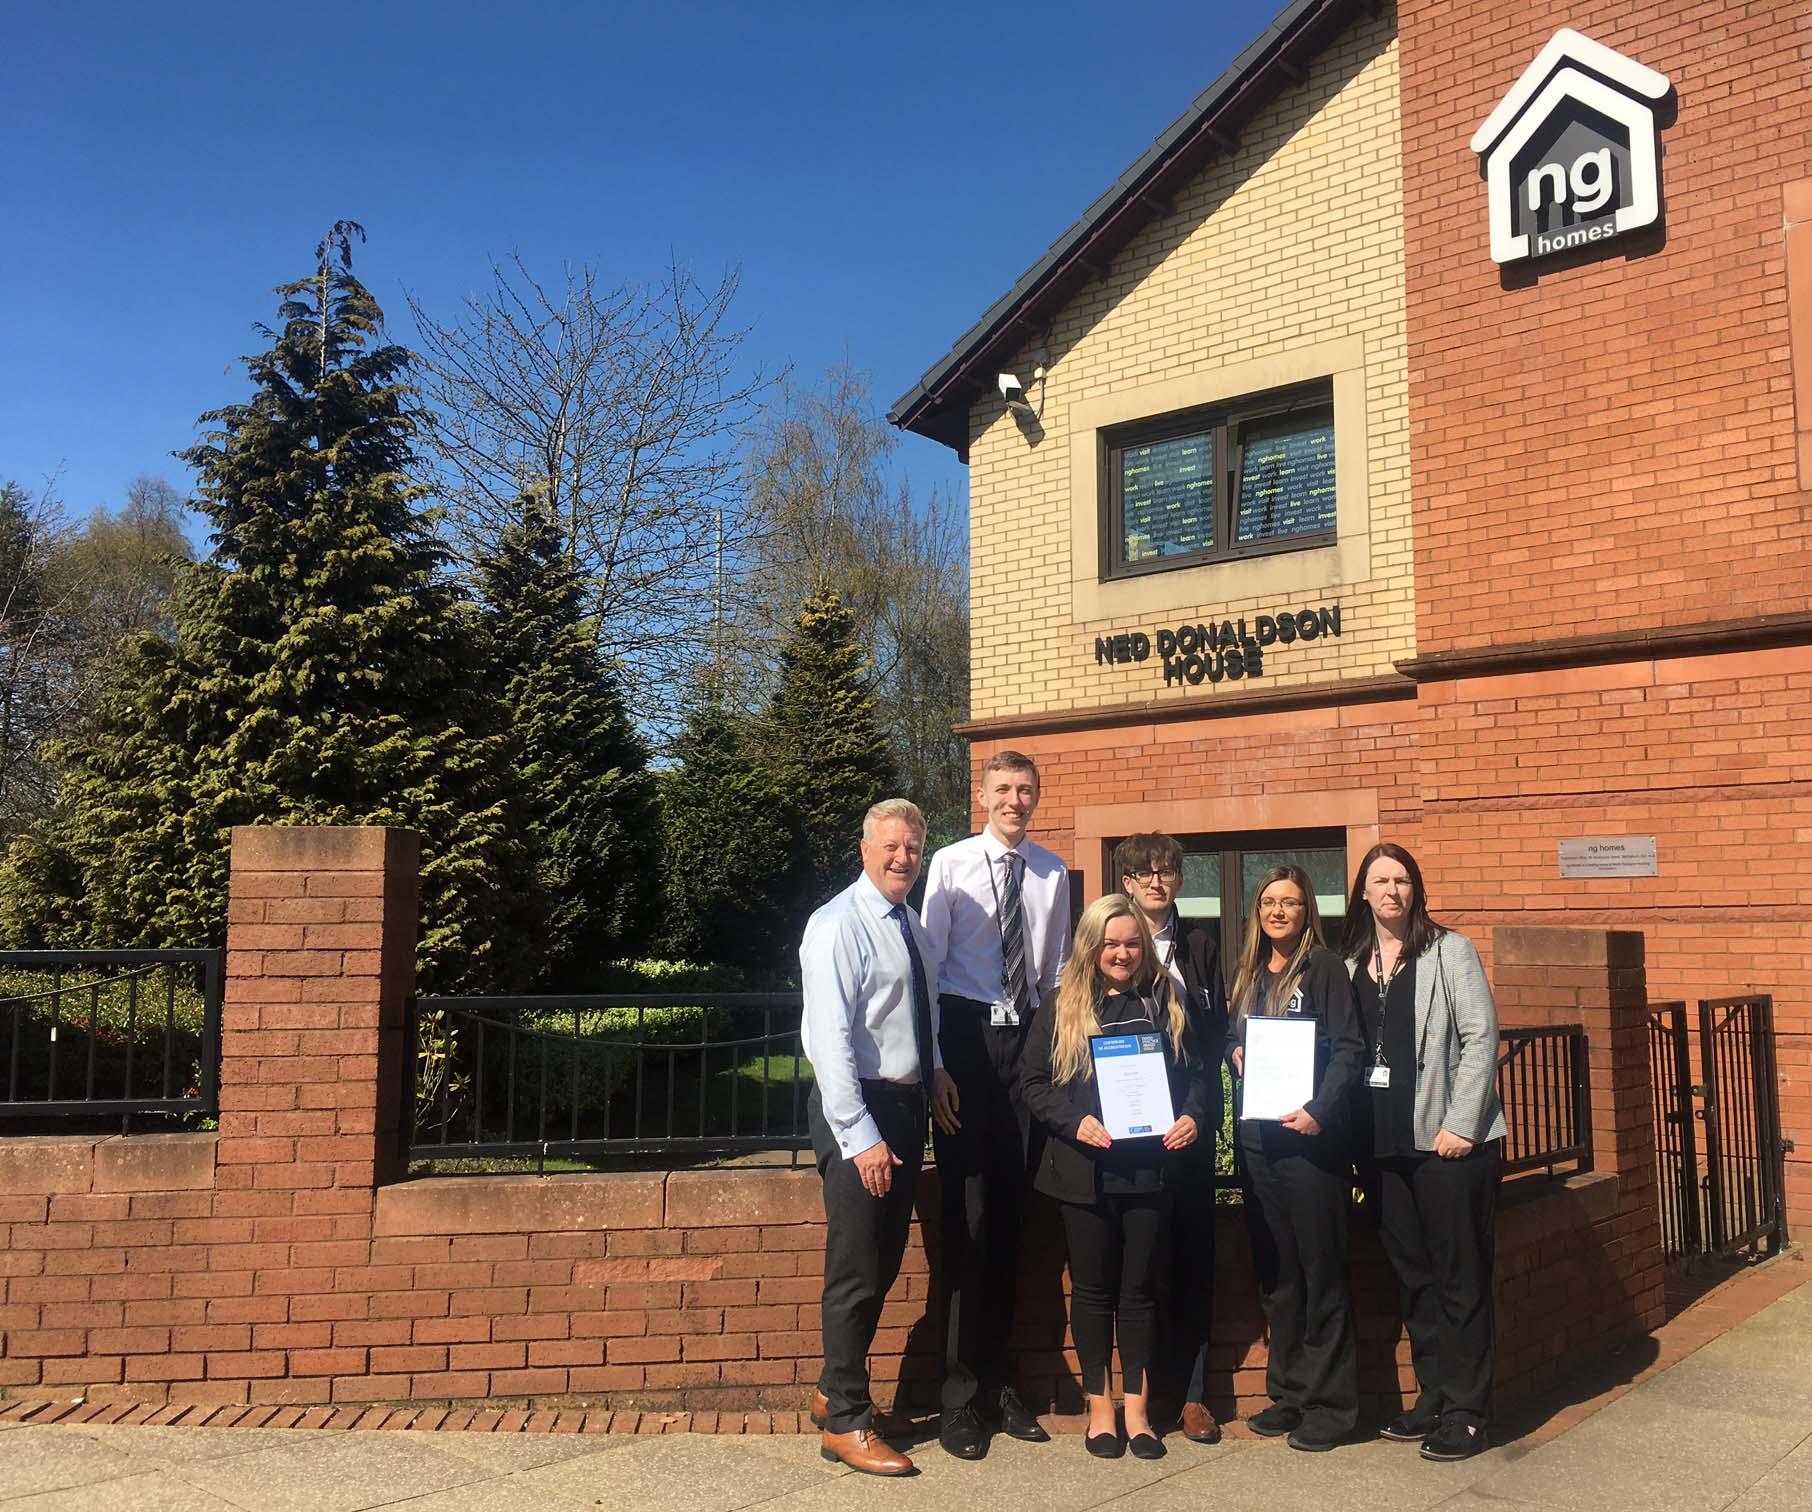 ng homes staff presenting Investors In Young People Gold Award